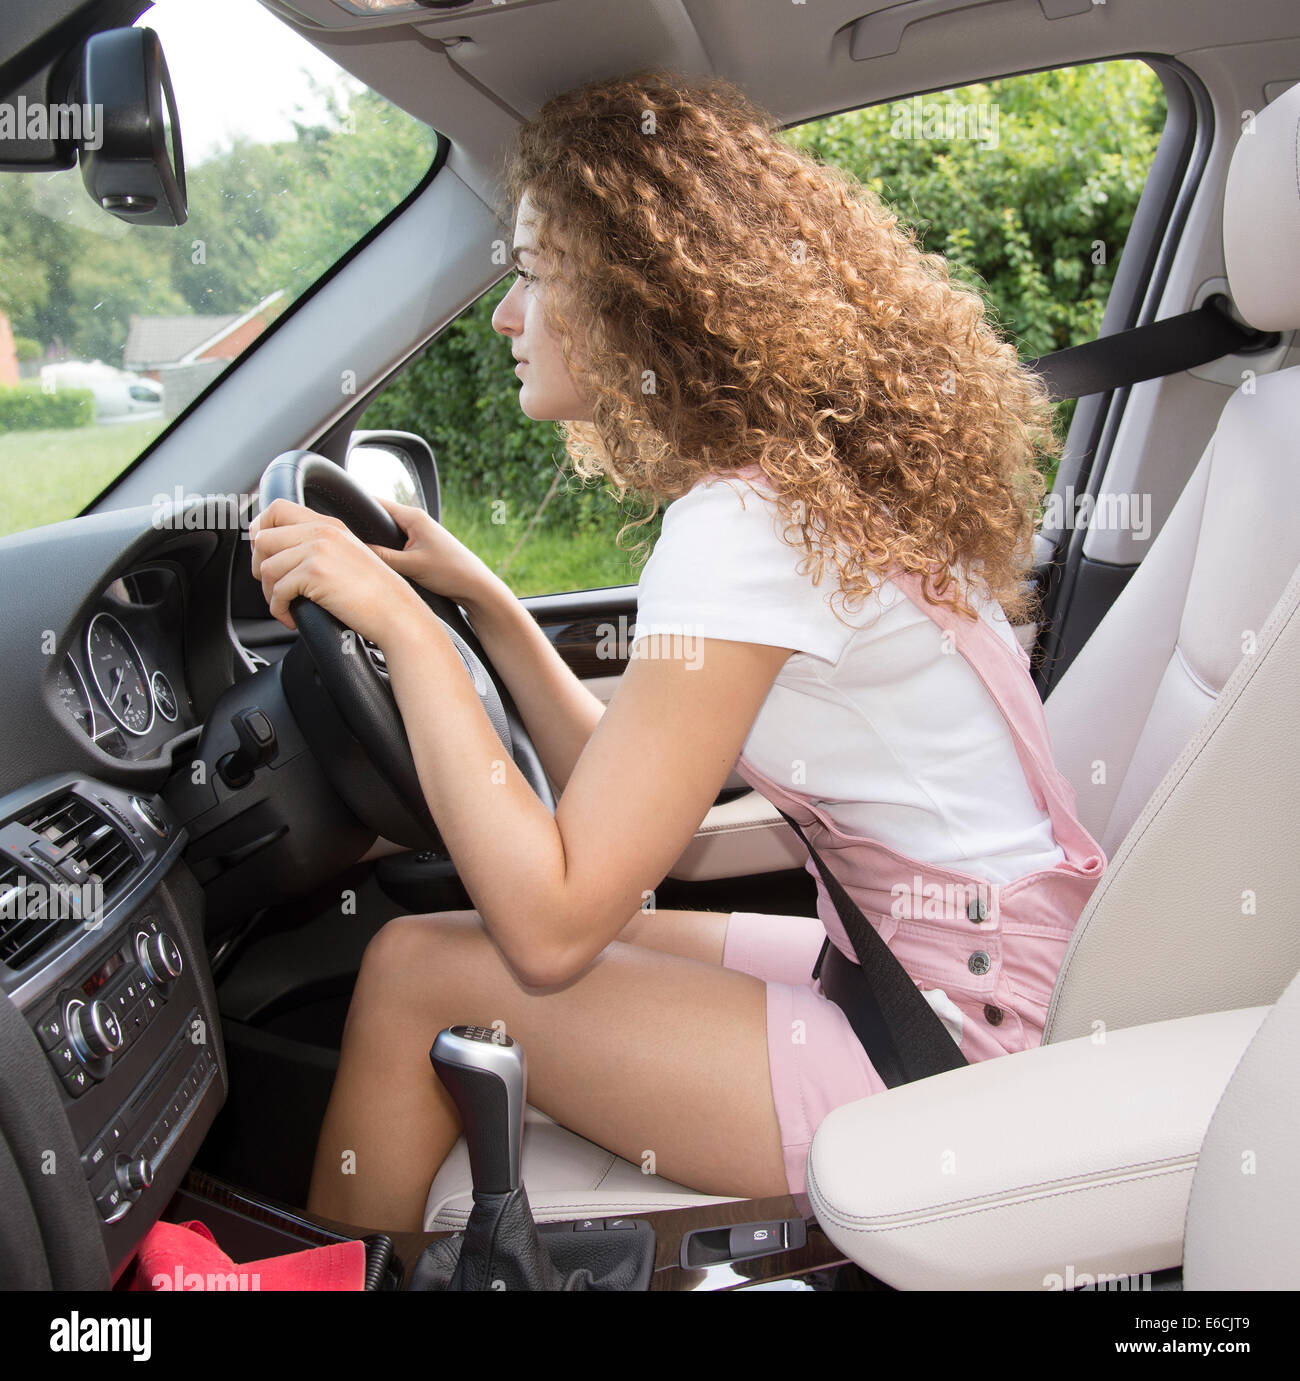 Bad posture and poor driving position. Young female motorist leaning over the steering wheel of a car Stock Photo